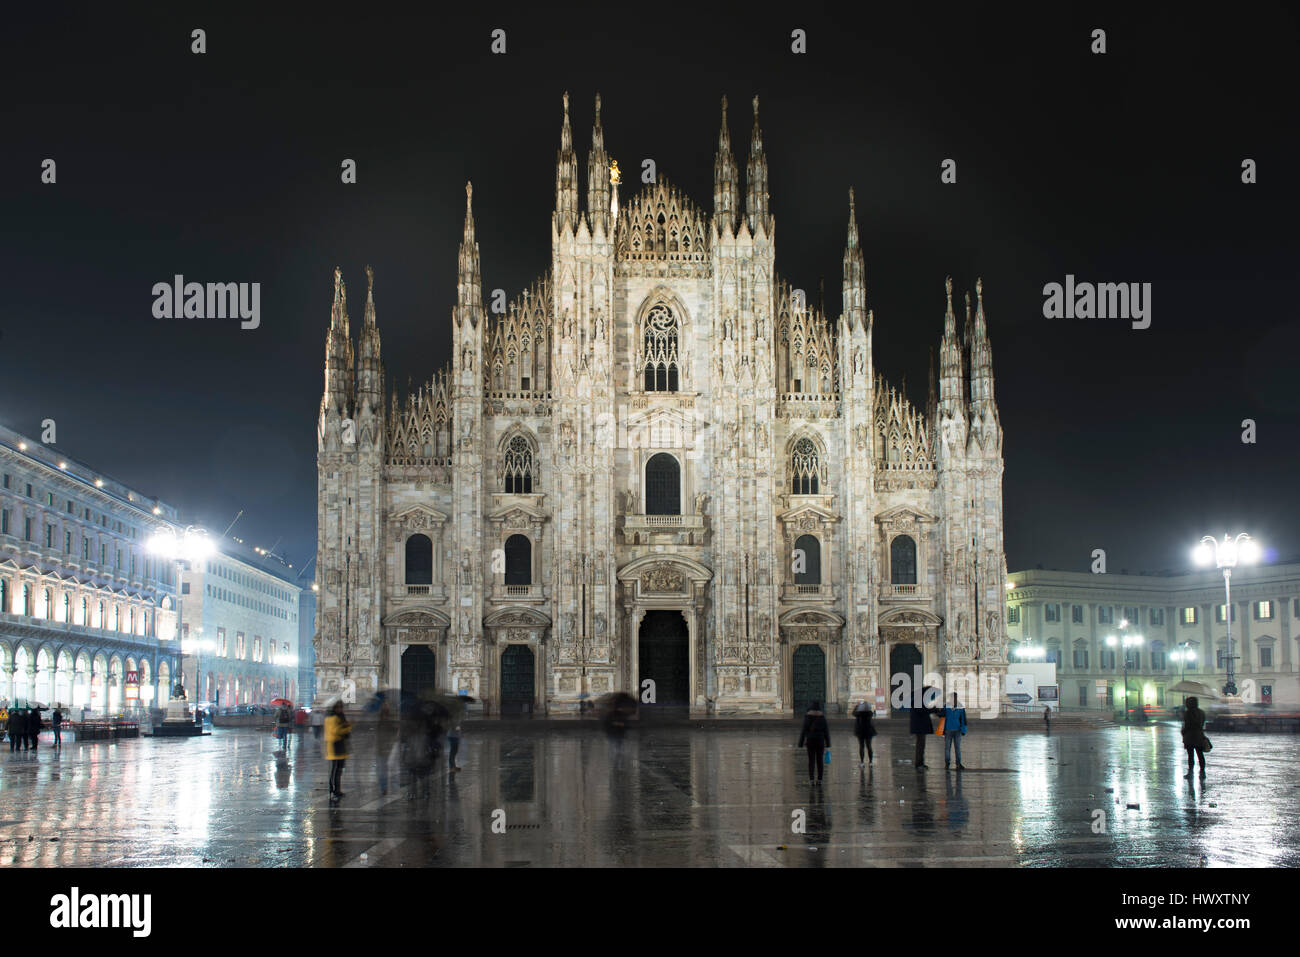 The Duomo di Milano, cathedral dedicated to Saint Mary of the Nativity ...